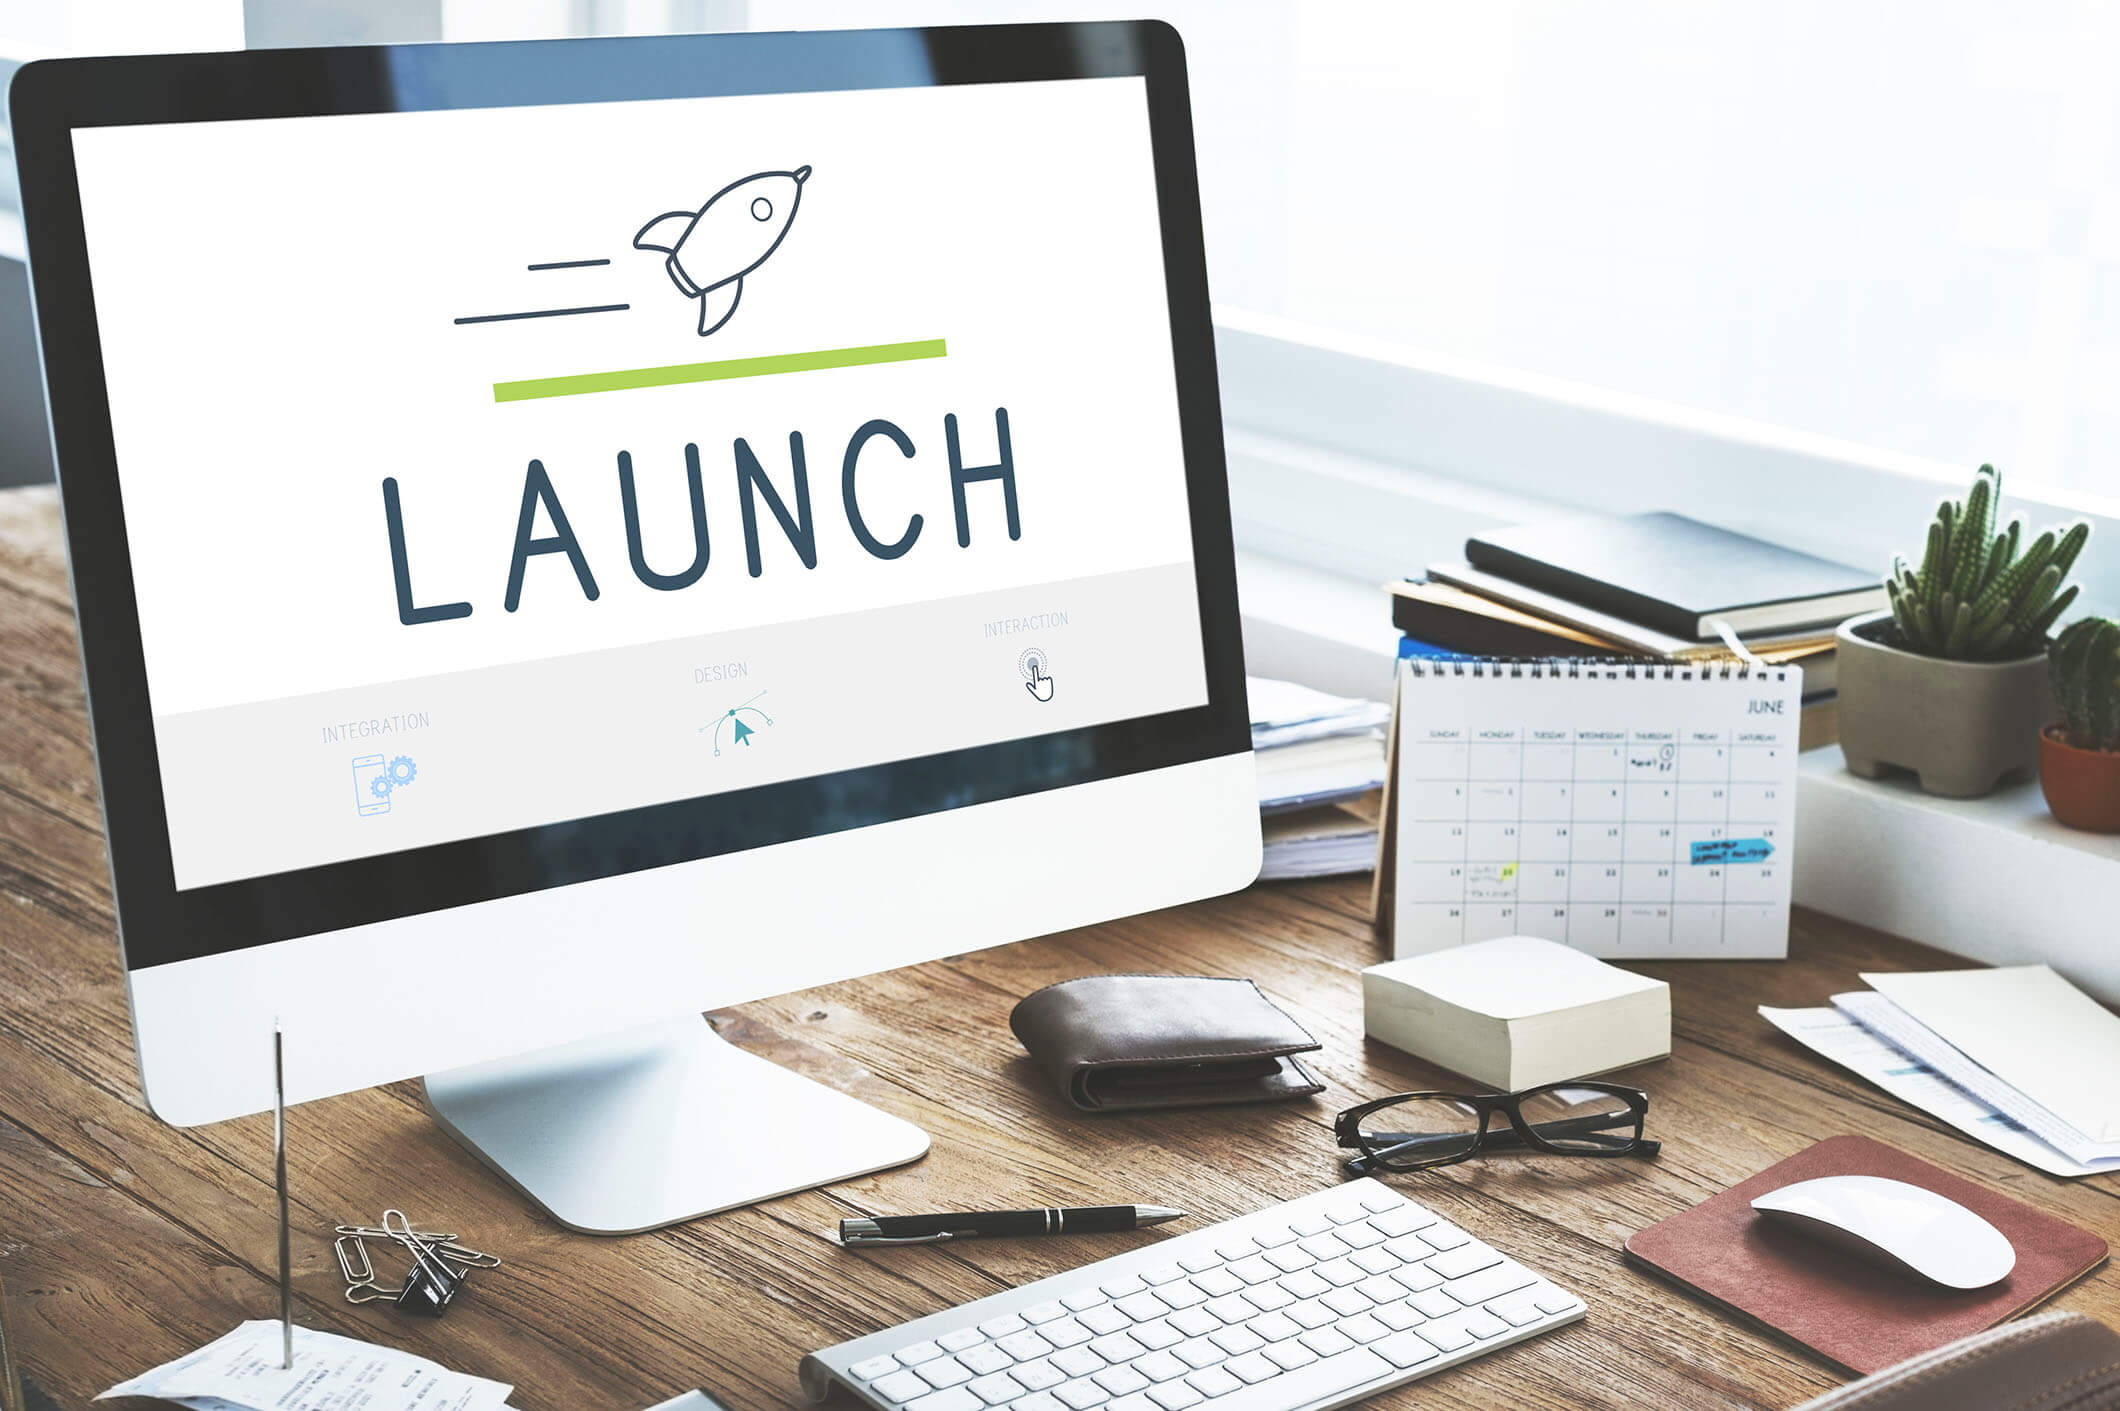 10 Mistakes to Avoid When Launching a Website